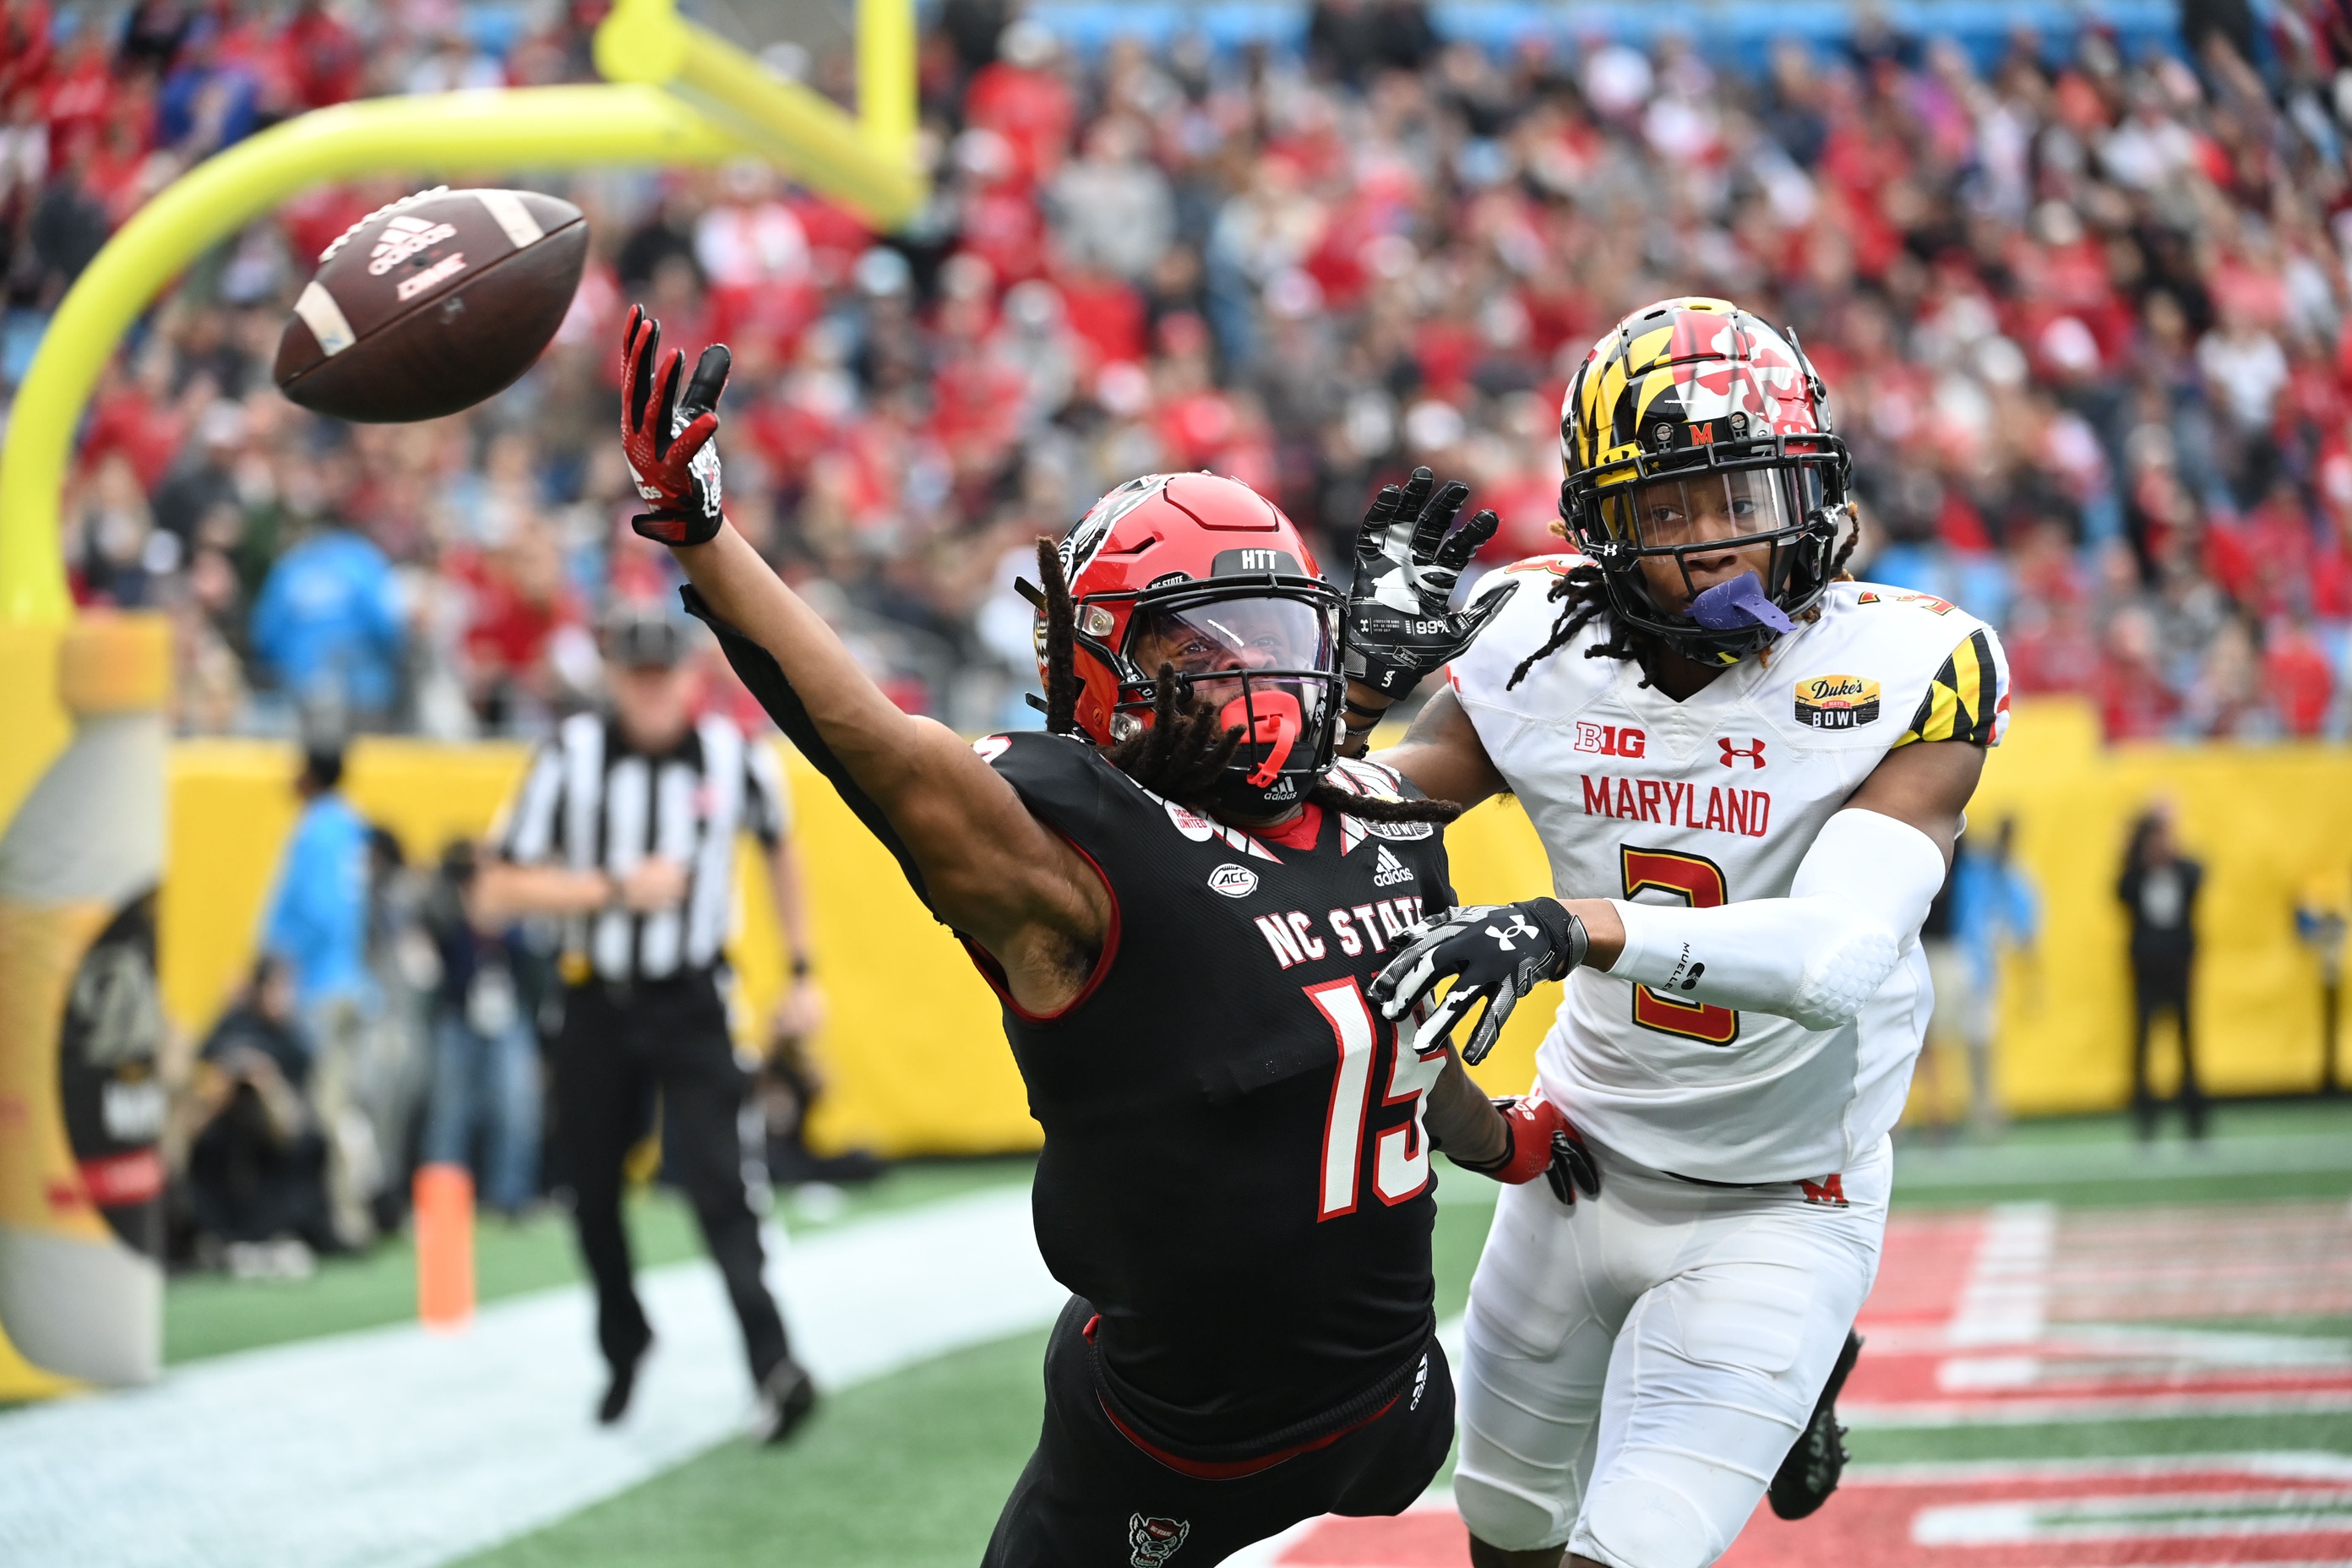 Maryland's Deonte Banks (right) defends